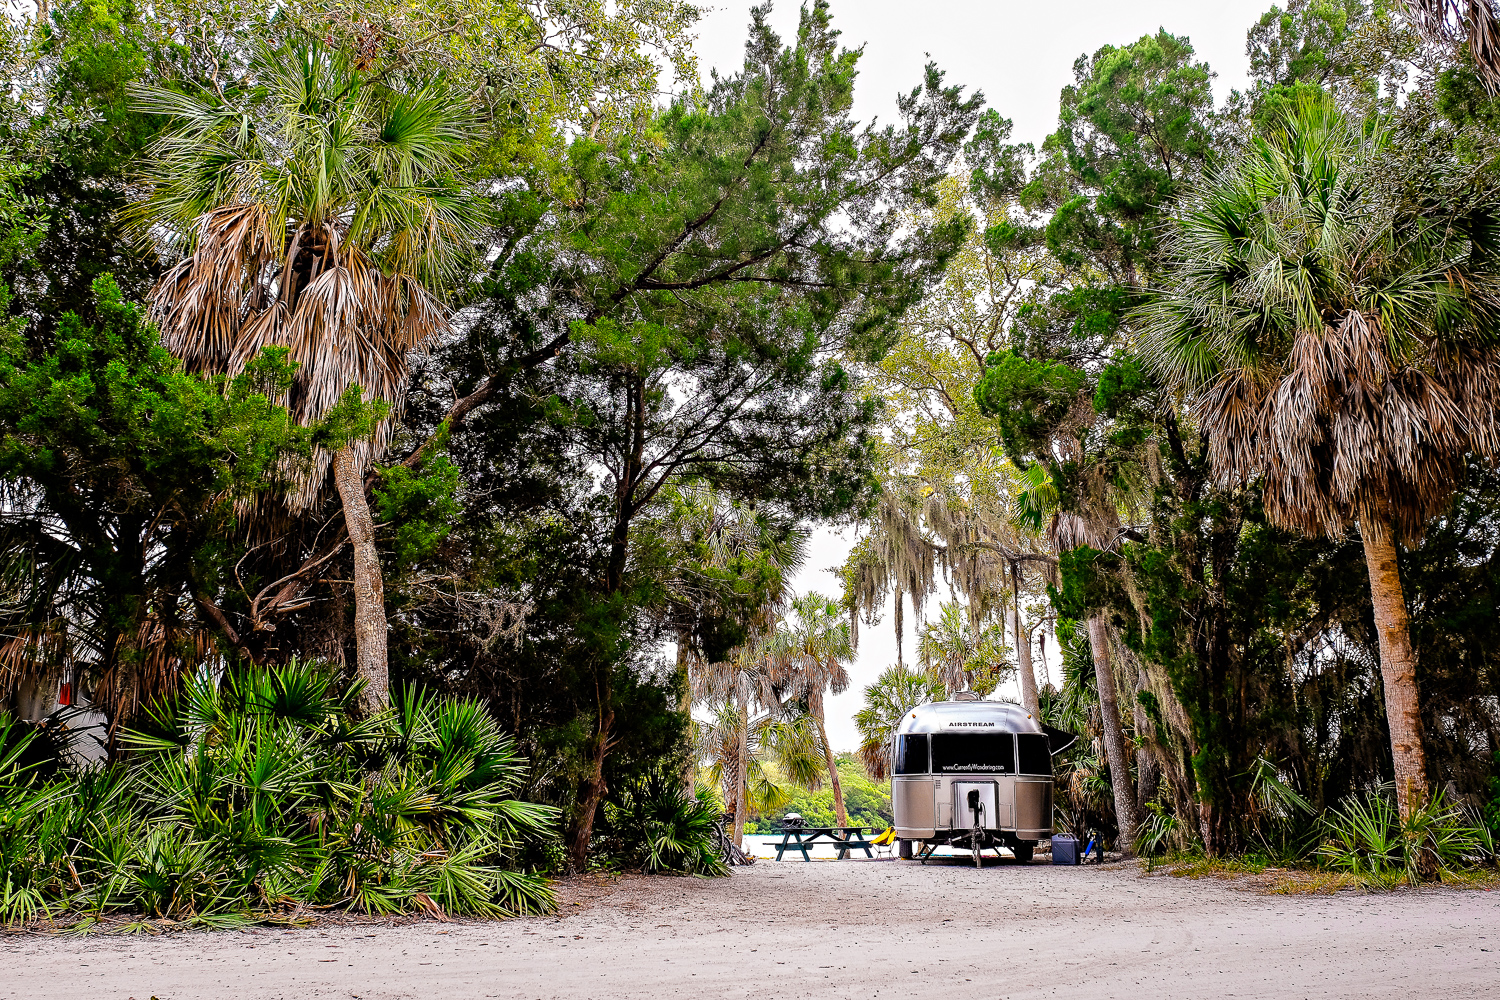 The Best RV Parks, Resorts and Campgrounds in Florida (Updated 2020)